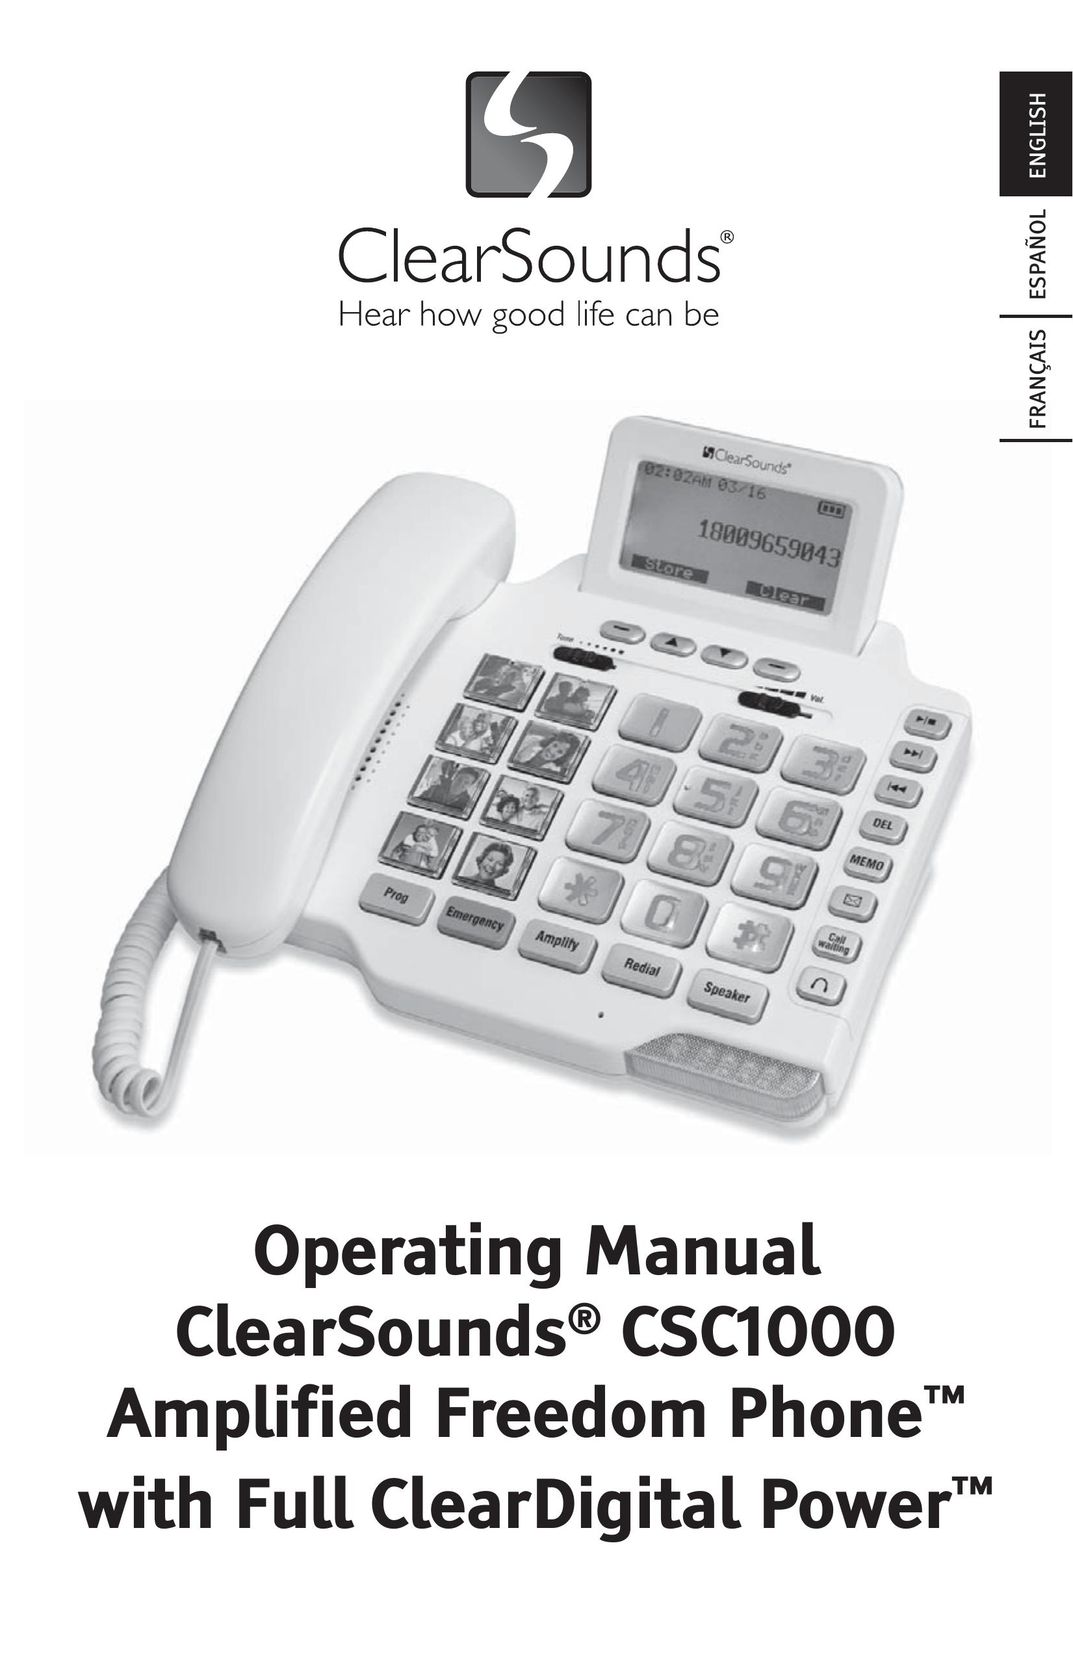 ClearSounds CSC1000 Telephone User Manual